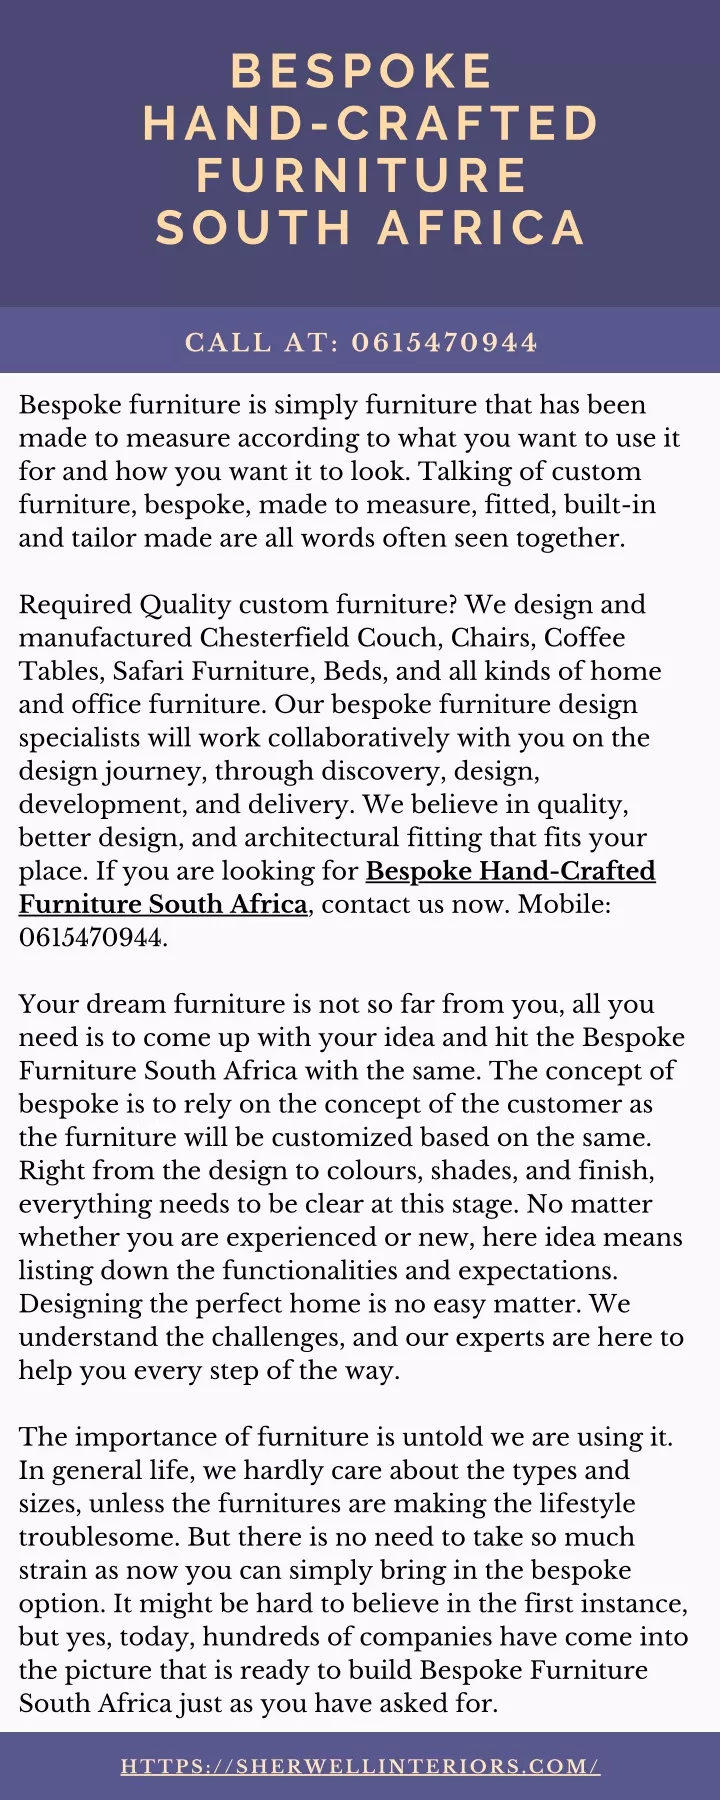 bespoke hand crafted furniture south africa